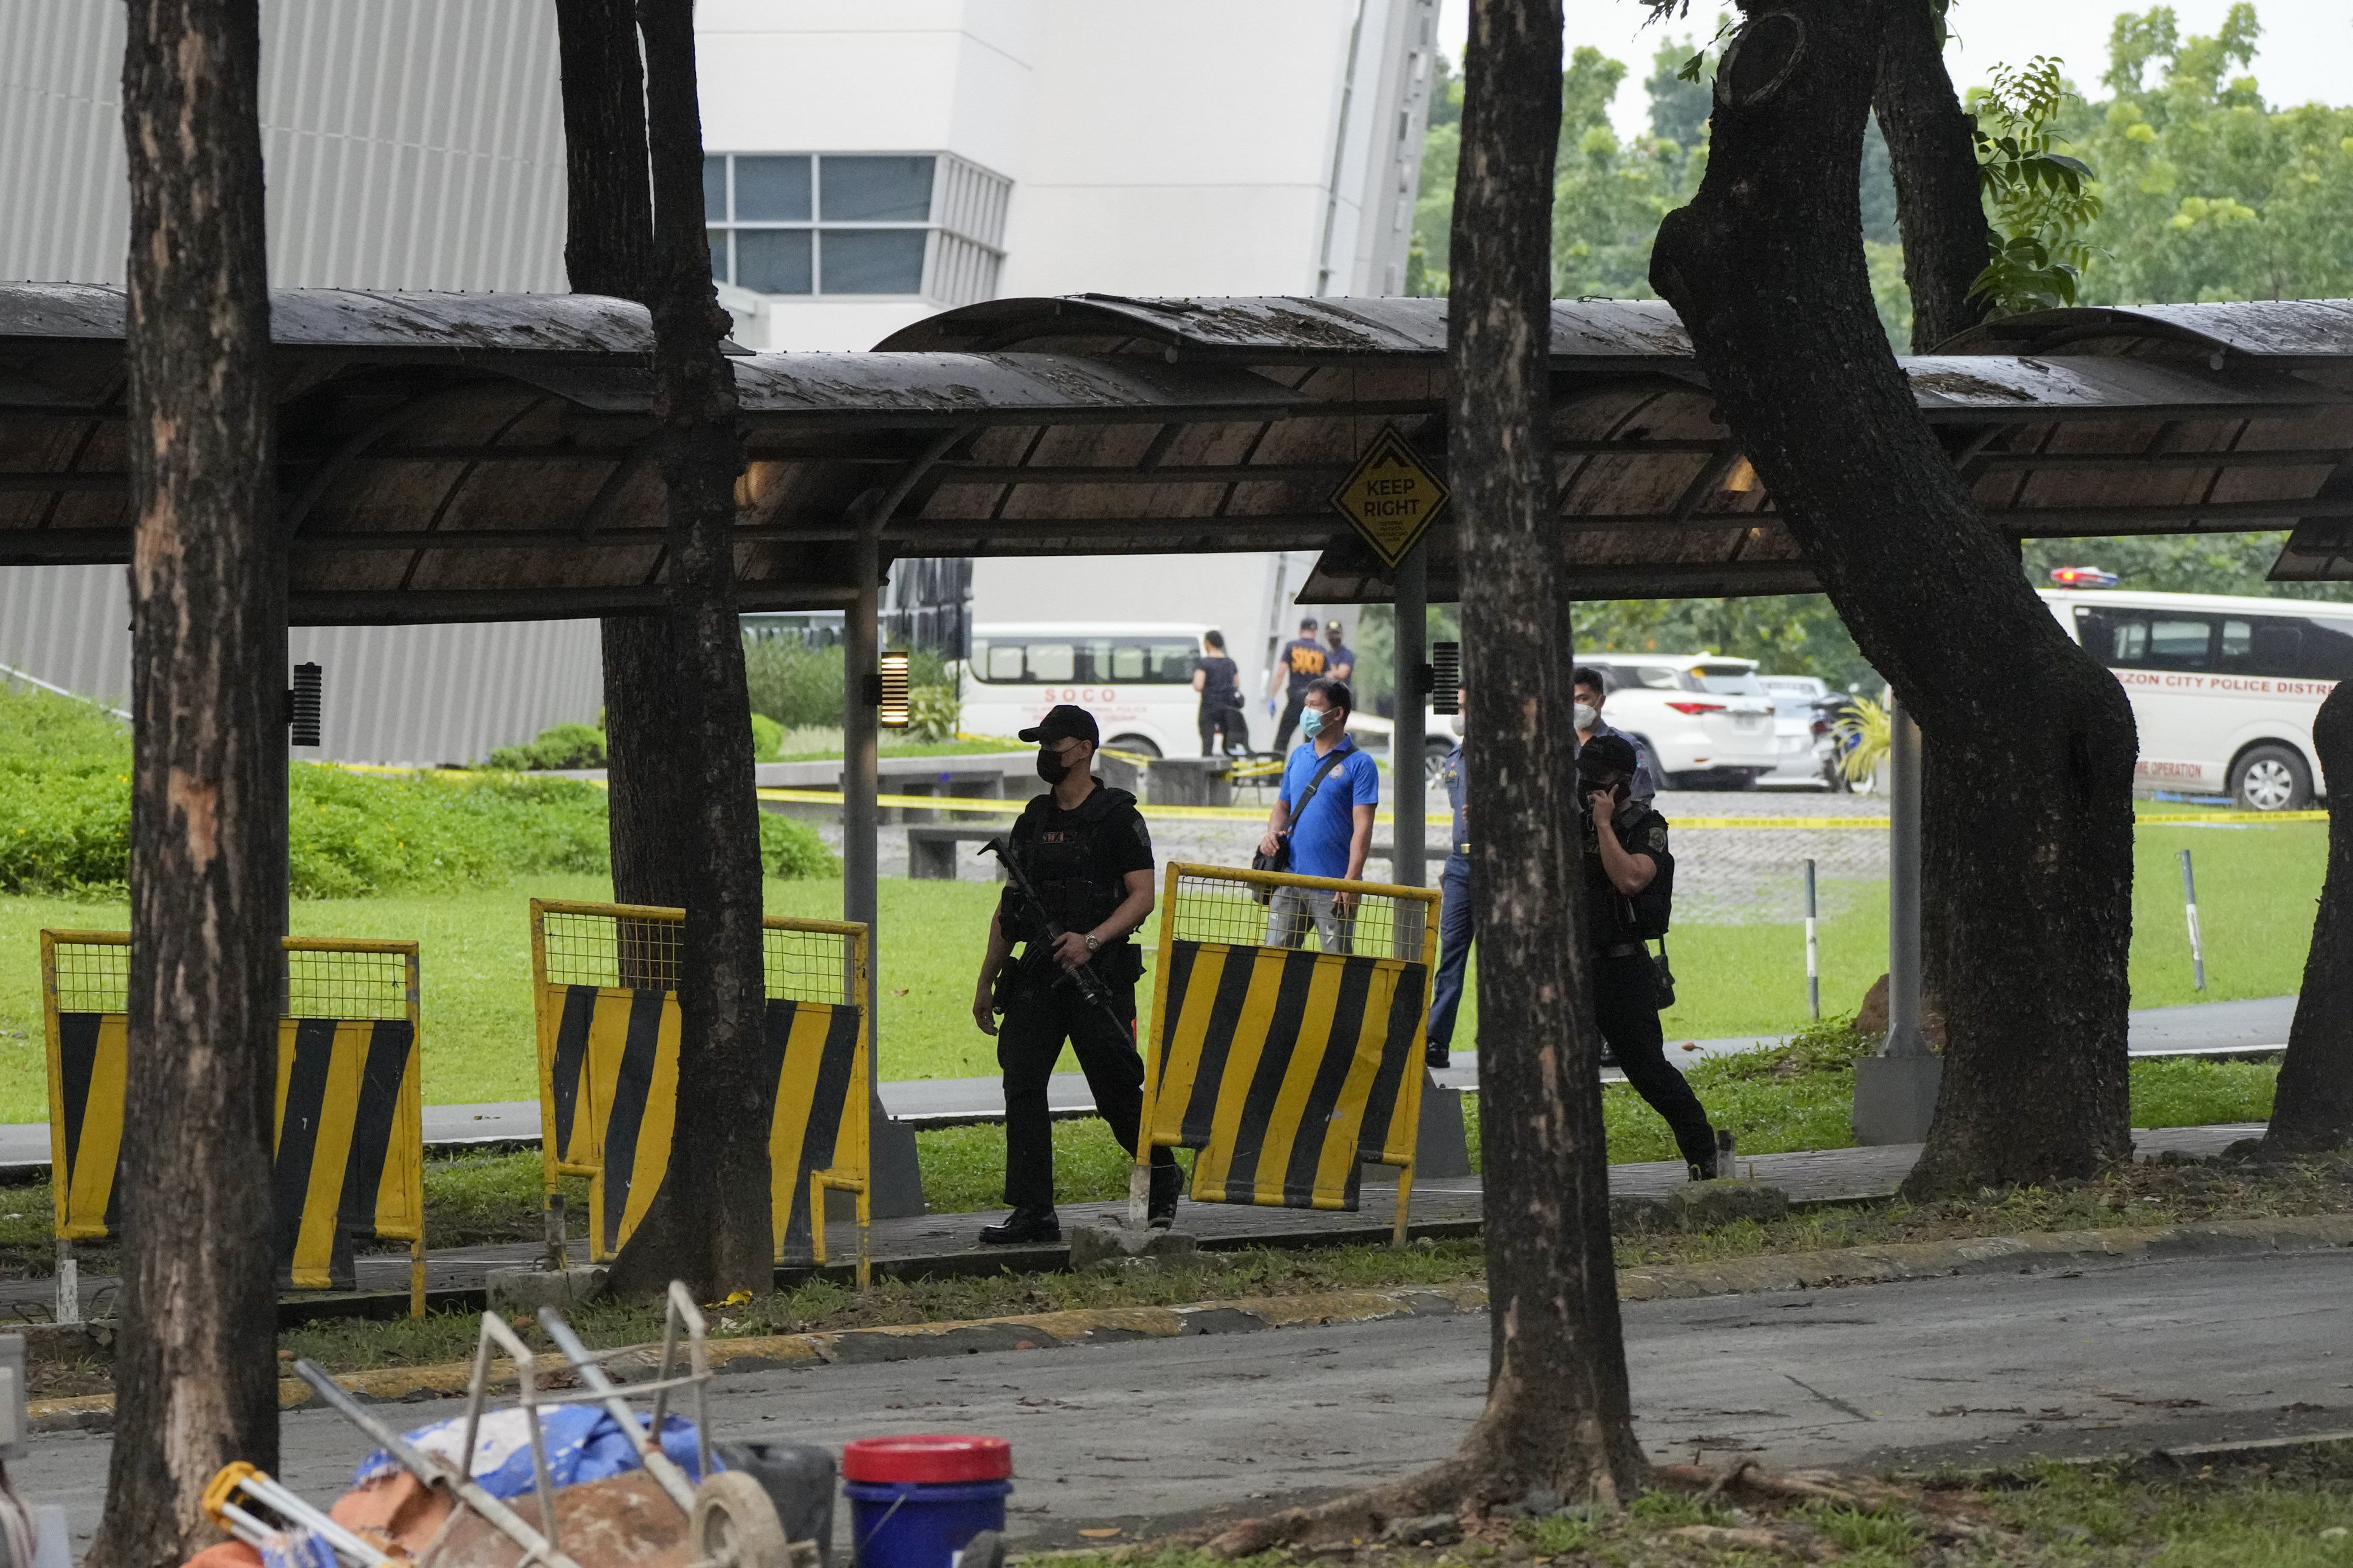 Armed police walk inside the Ateneo de Manila University campus in Quezon city, Philippines, where a gunman killed at least three people. Photo: AP